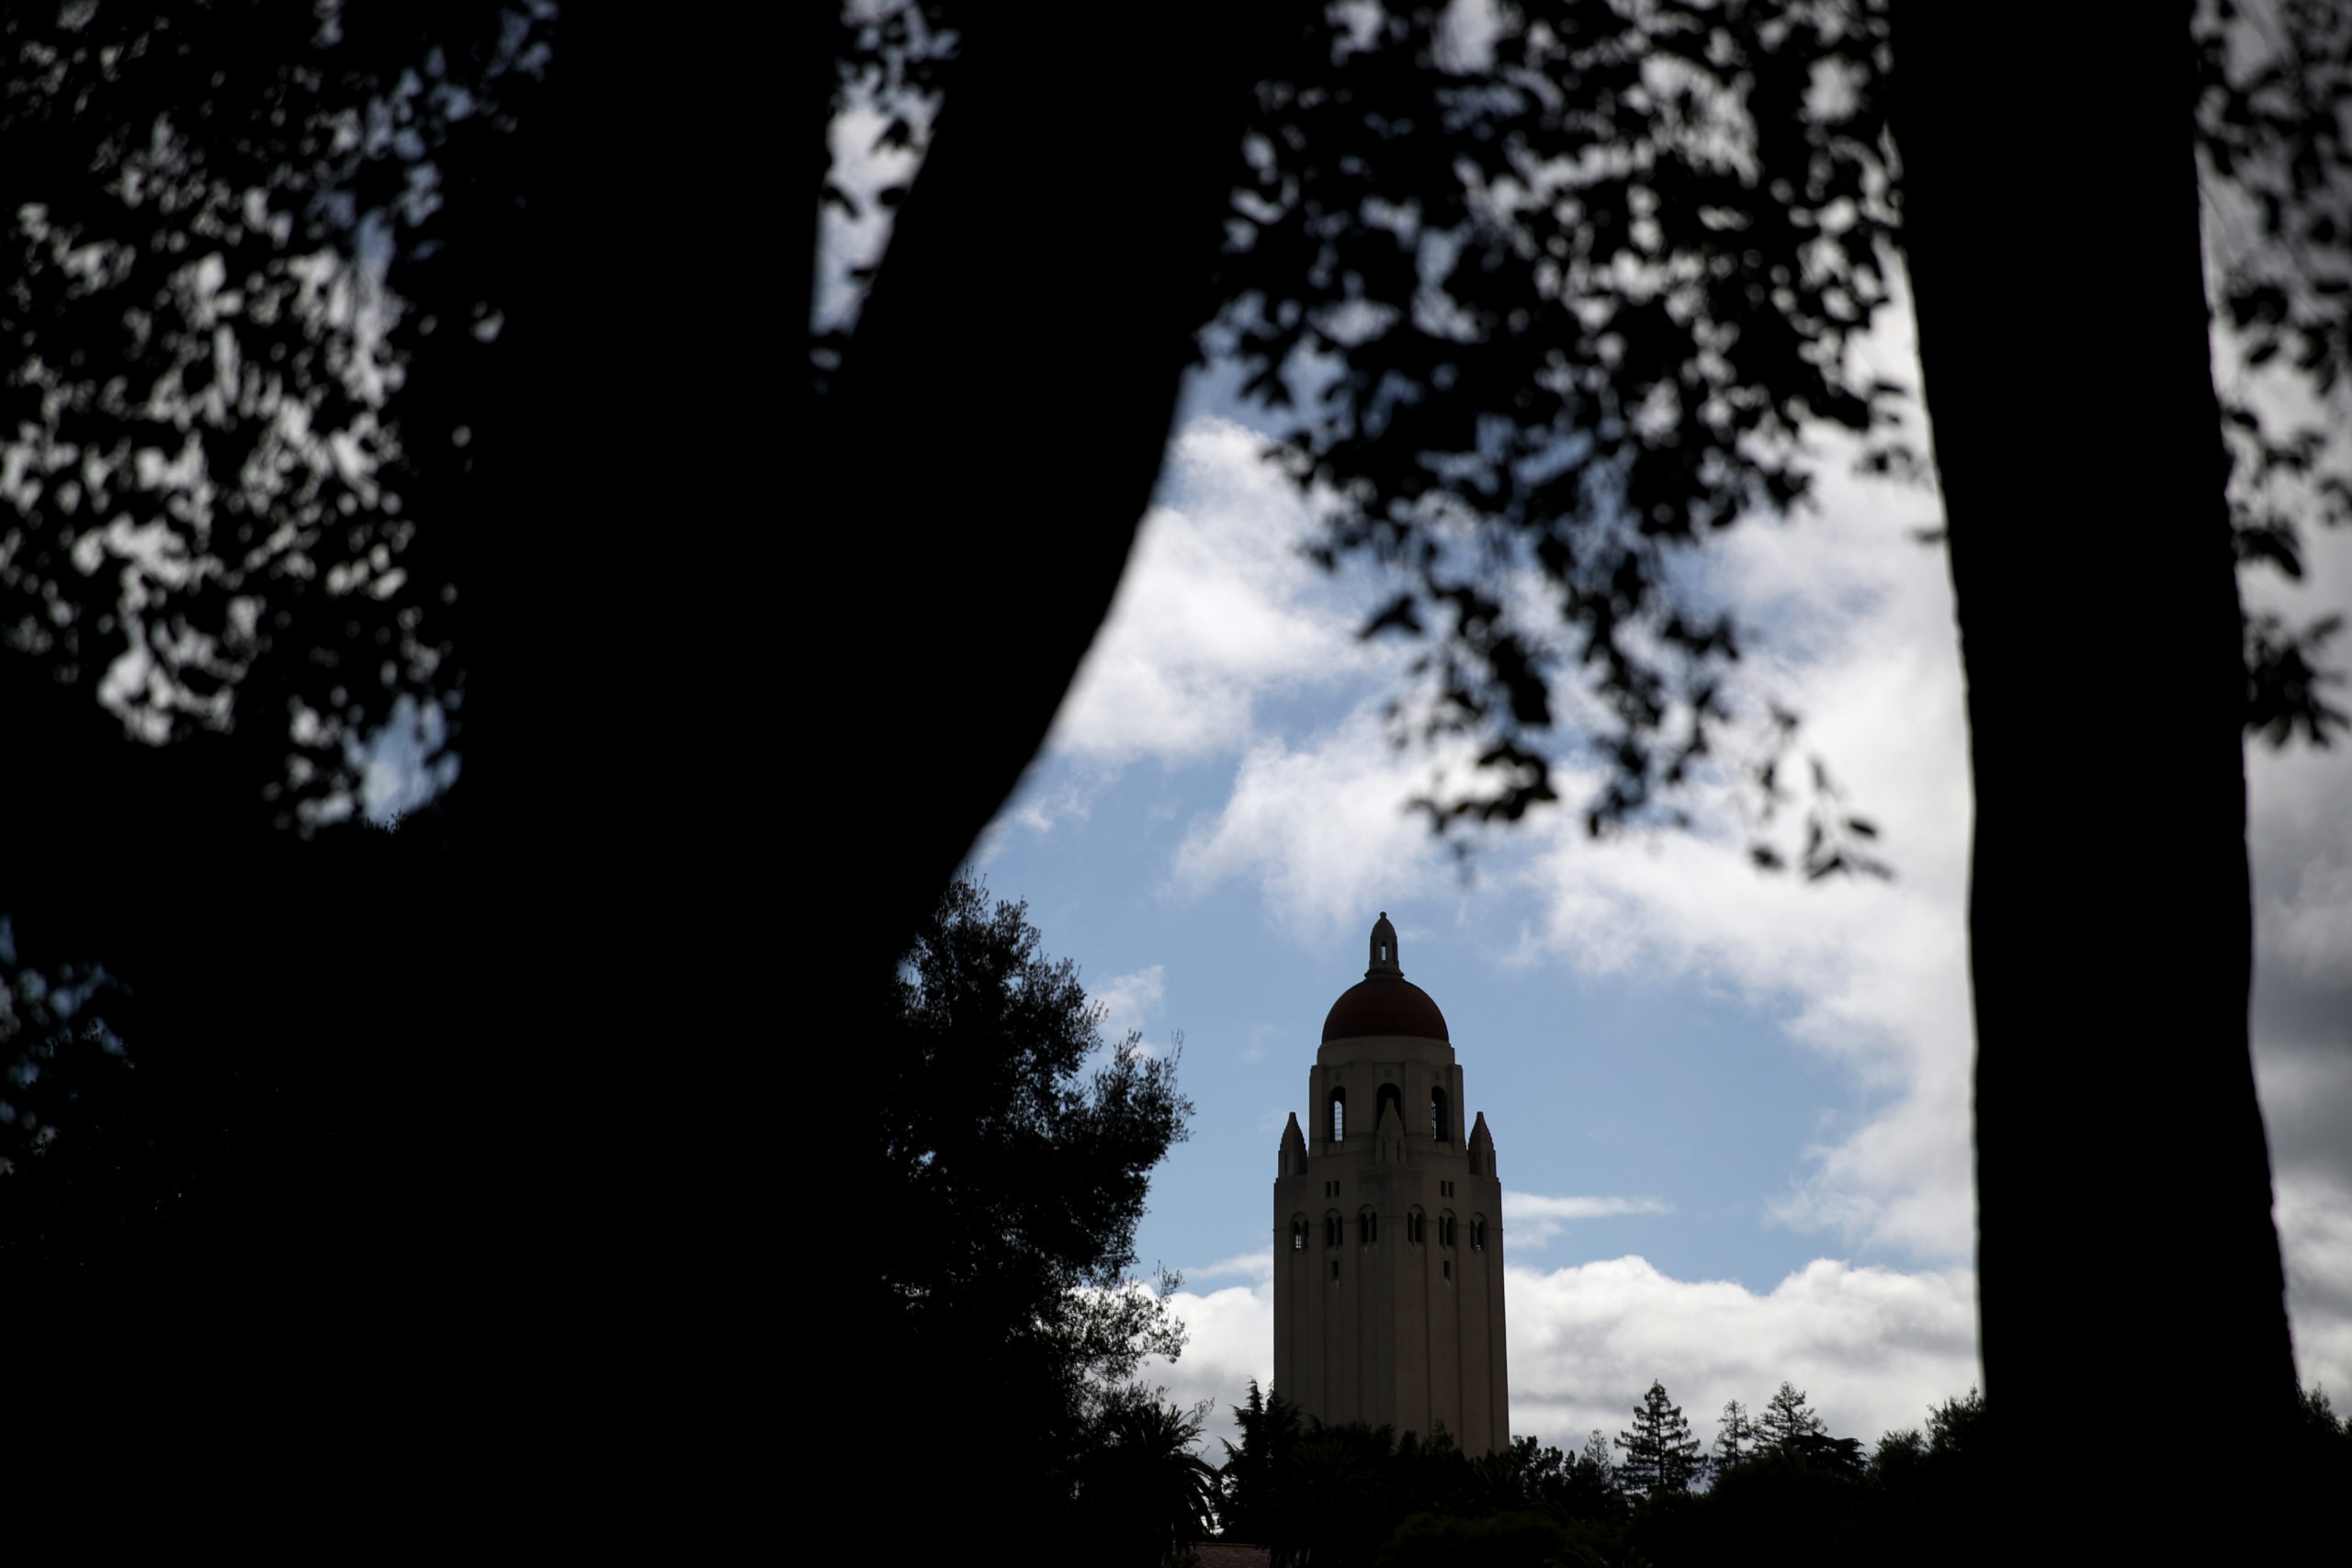 A view of Hoover Tower on the Stanford University campus on March 12, 2019 in Stanford, California.